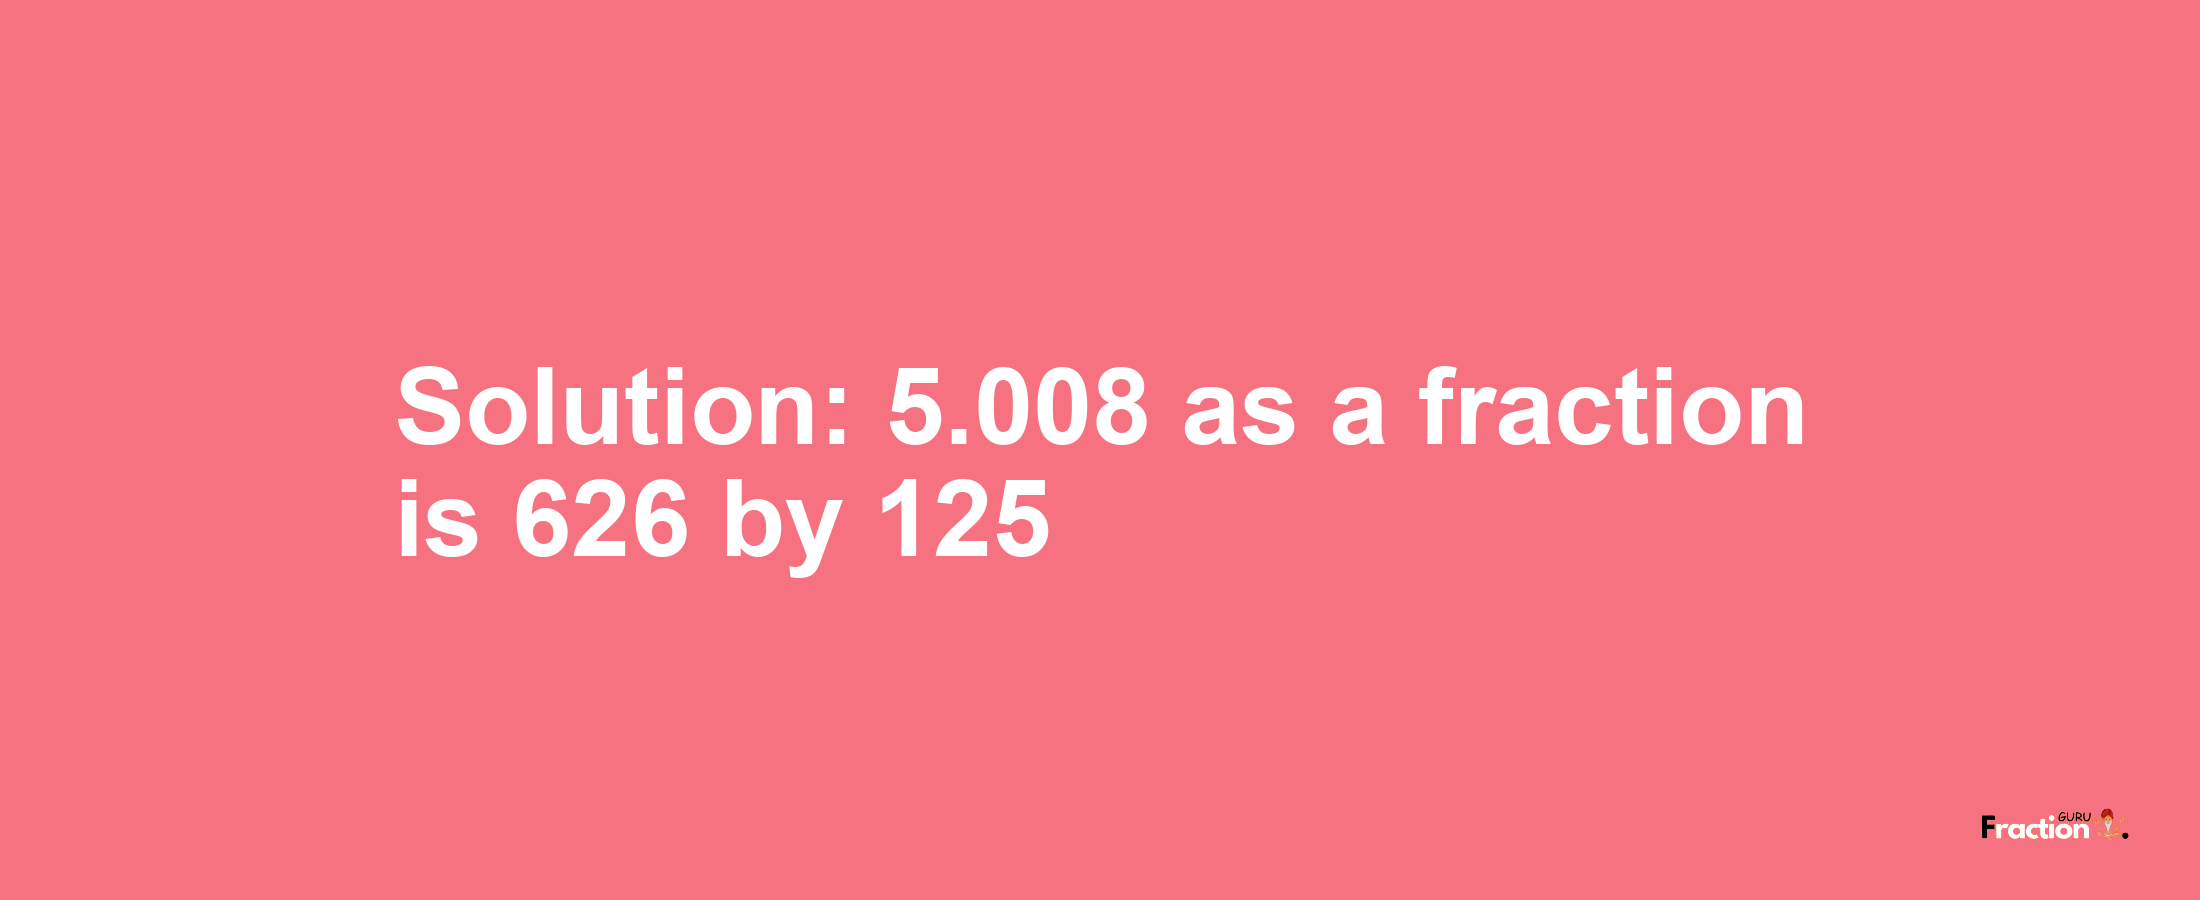 Solution:5.008 as a fraction is 626/125